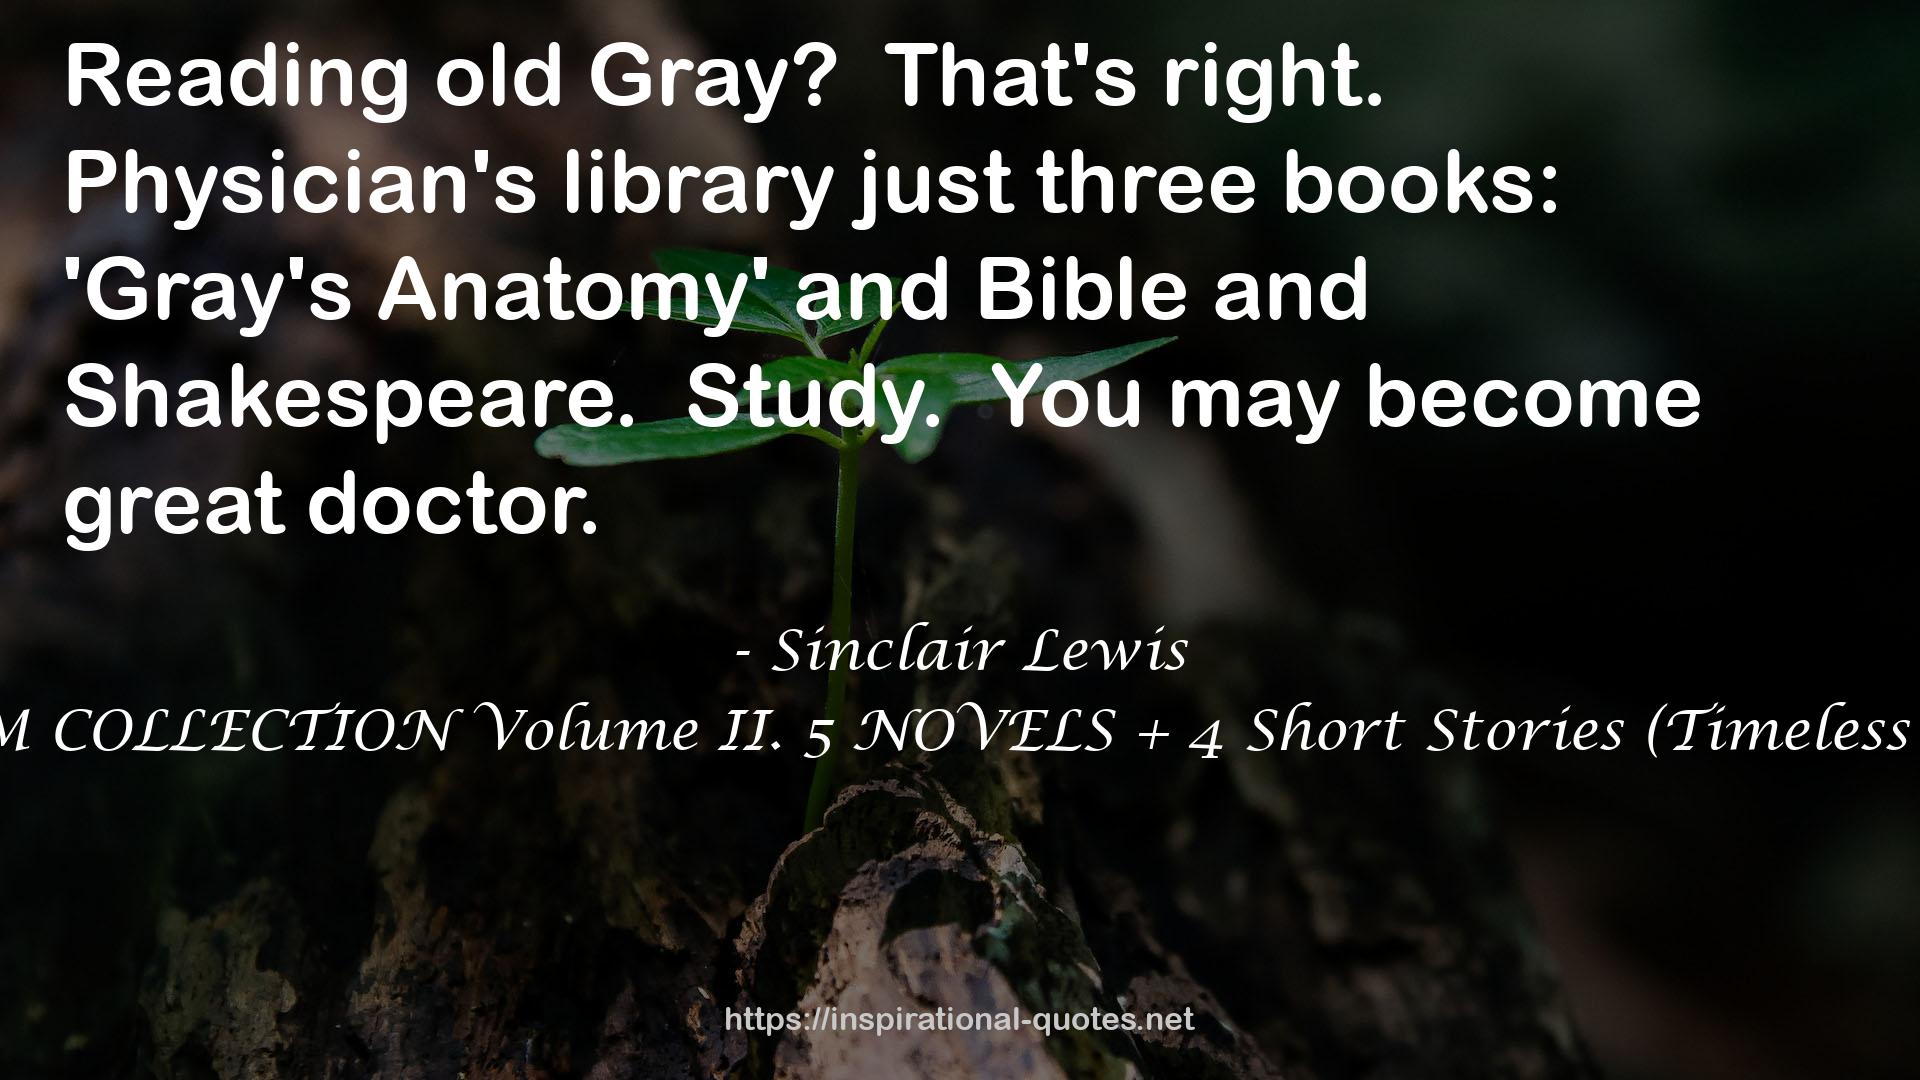 SINCLAIR LEWIS PREMIUM COLLECTION Volume II. 5 NOVELS + 4 Short Stories (Timeless Wisdom Collection Book 1281) QUOTES